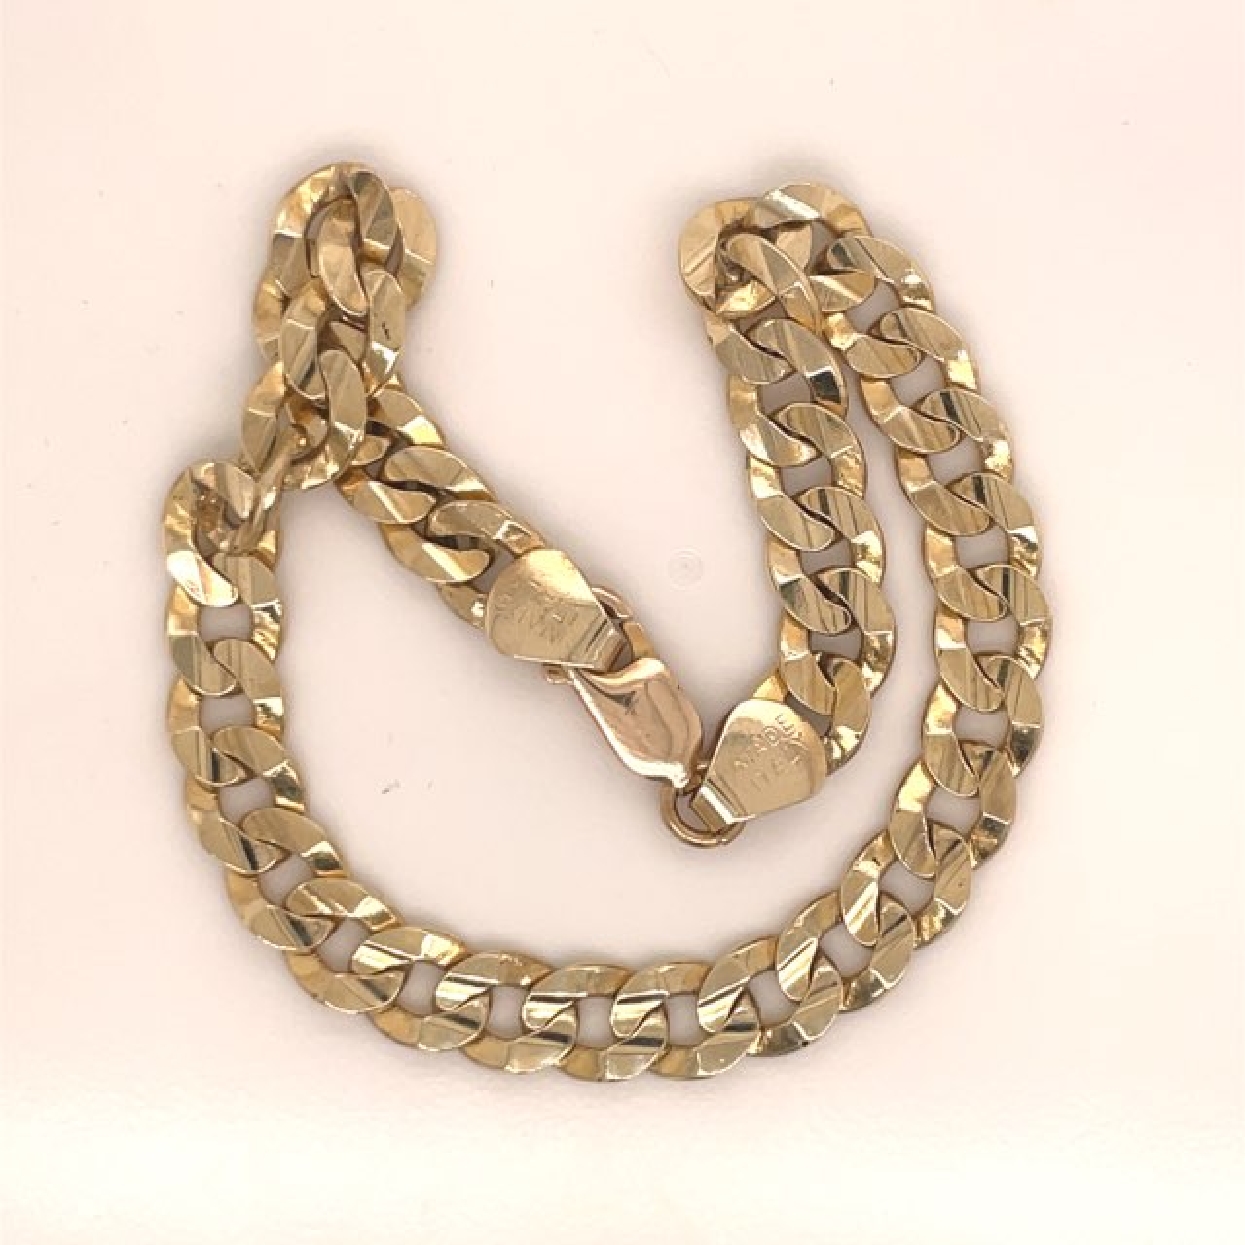 10K Yellow Gold Curb Chain Bracelet

Length: 9 Inches